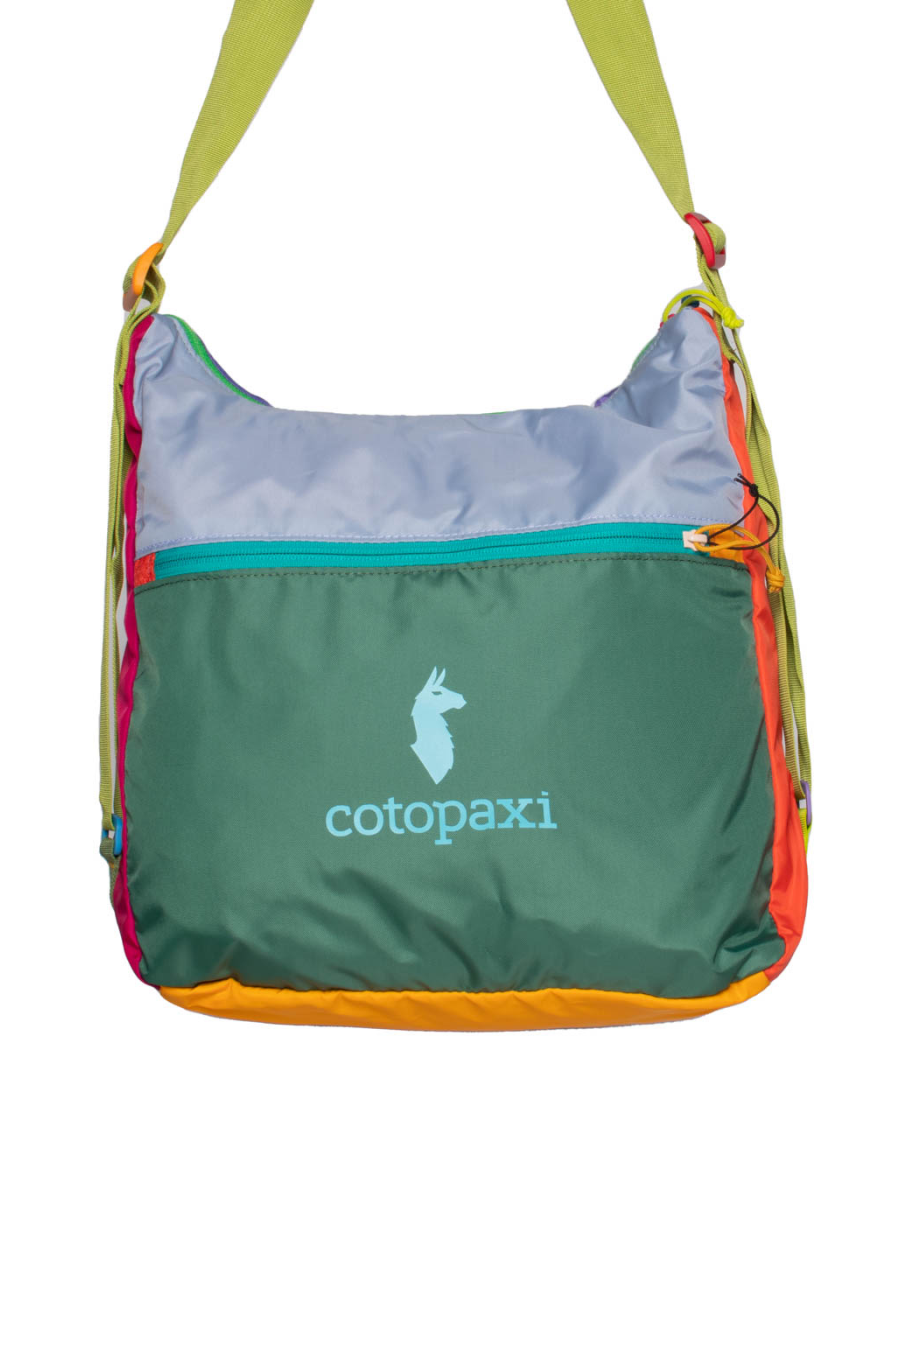 Cotopaxi Taal Convertible Tote